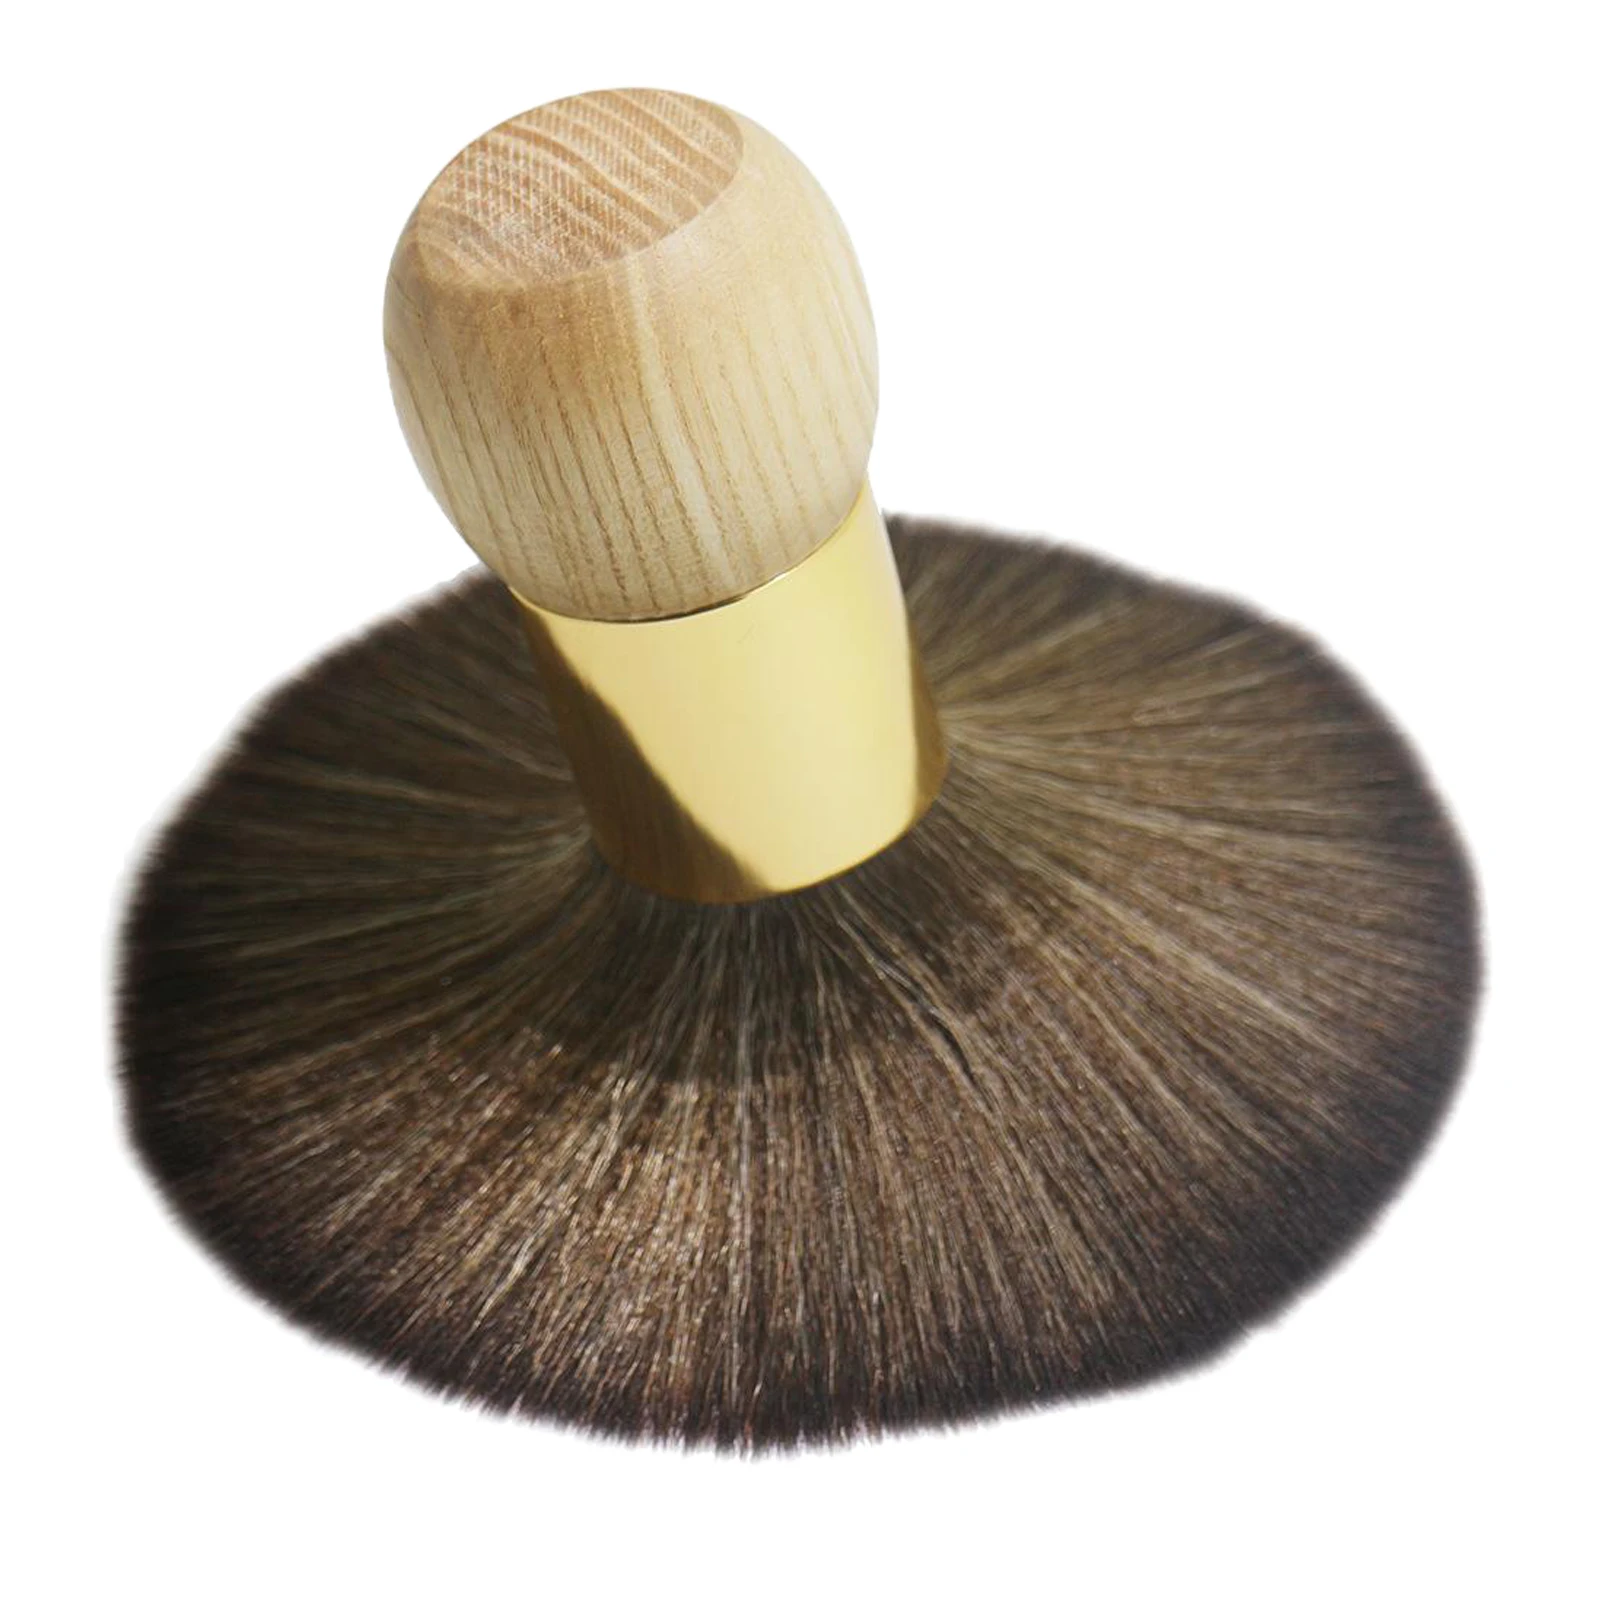 Home Use Wooden Neck Duster Brush Hairbrush Haircut for Barber Hairdressing Styling Tool Cleaning Remove Hair Clippings